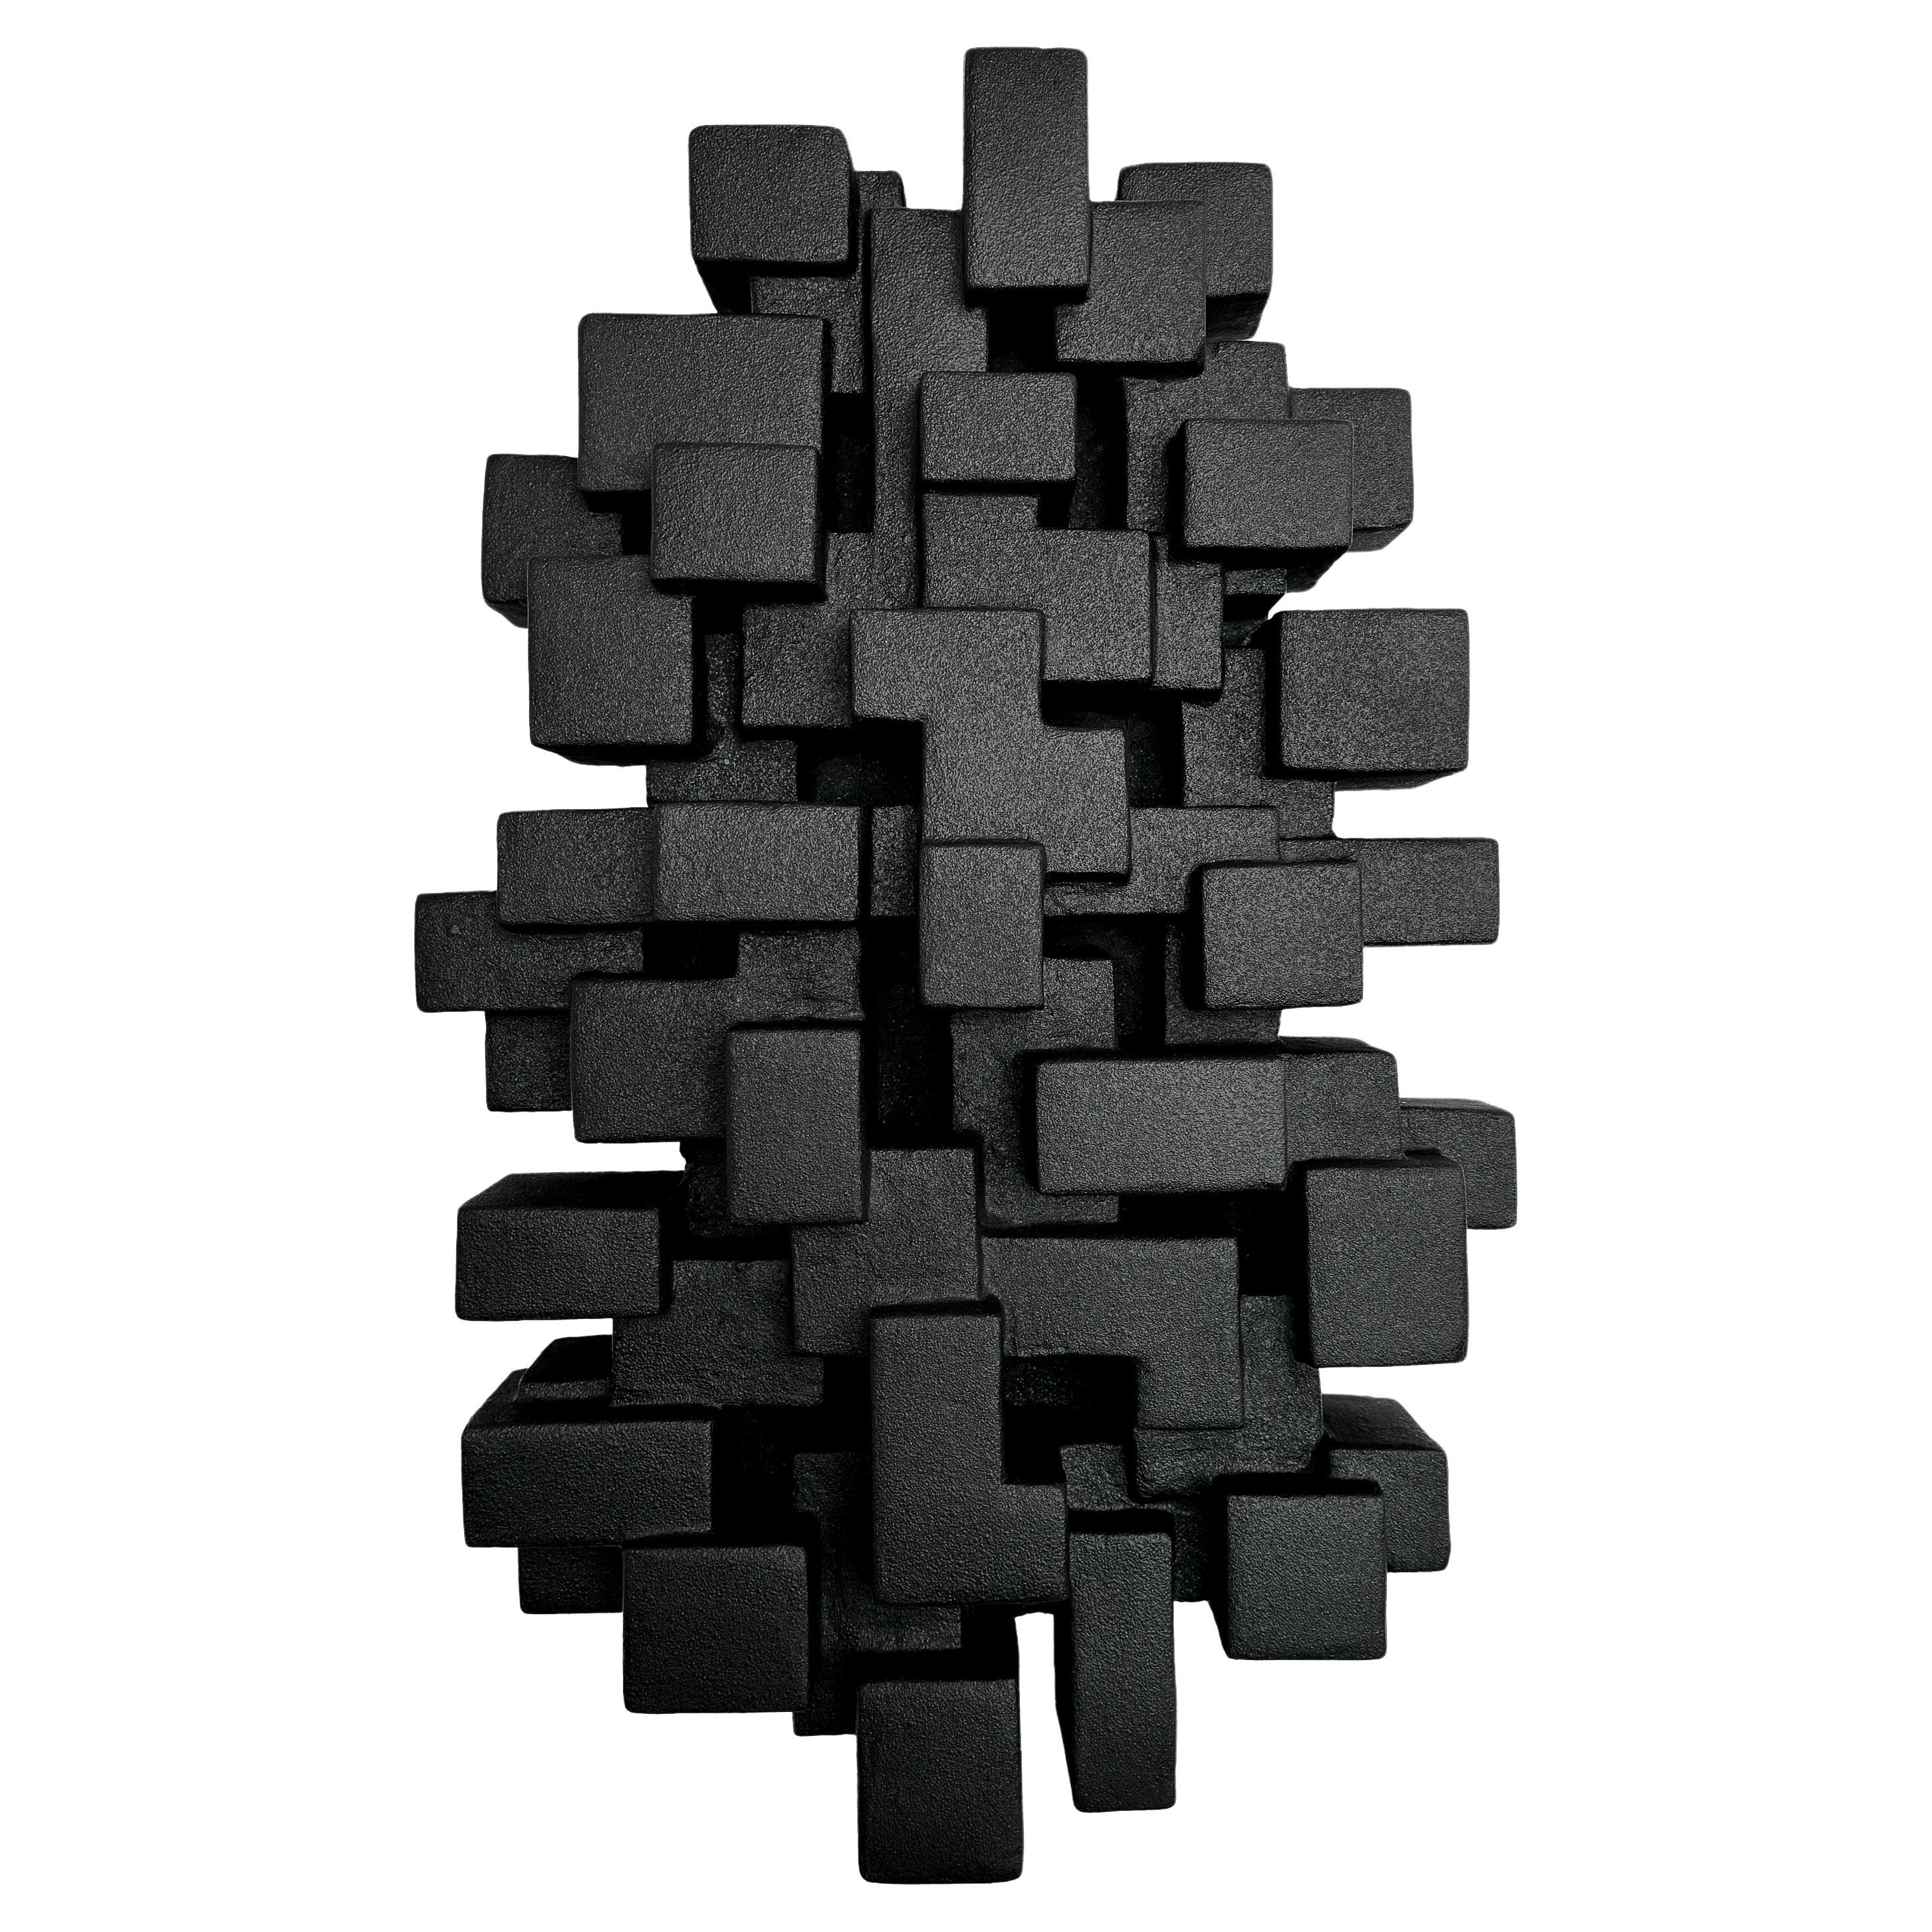 "Composition 20.1" Geometric Abstract Wall Sculpture by Dan Schneiger